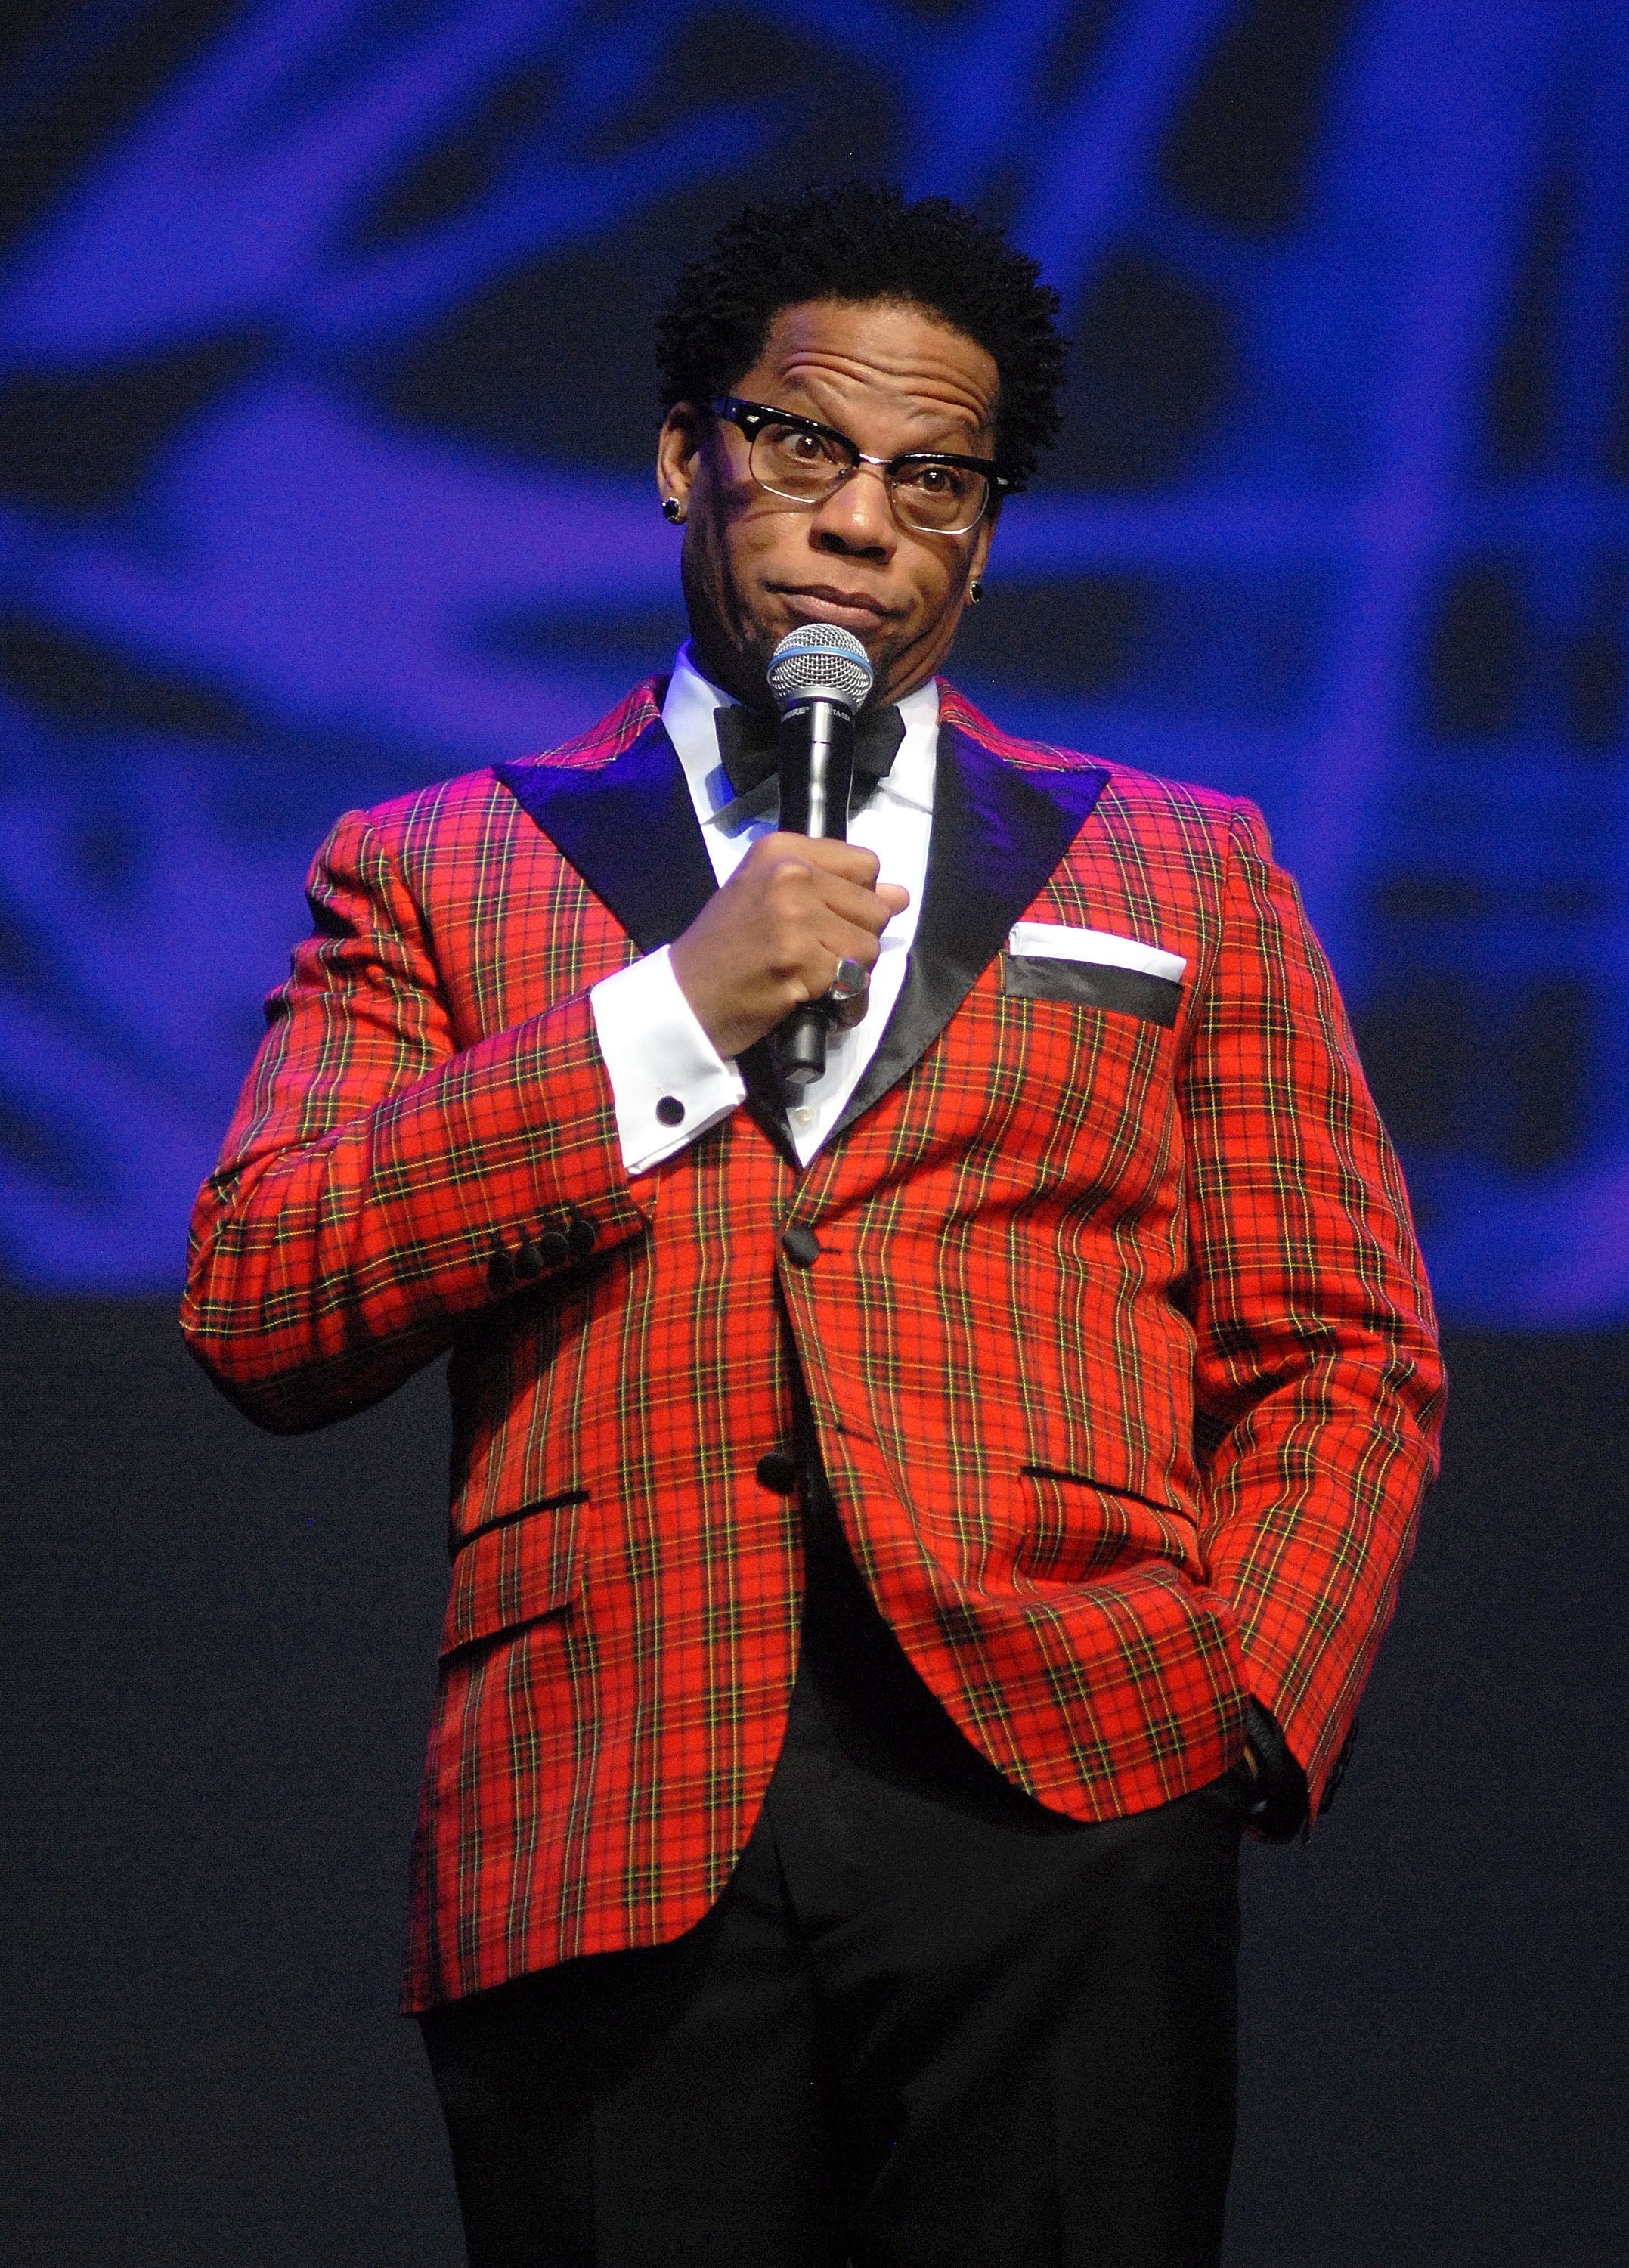 D.L. Hughley performs at MotorCity Casino's Sound Board Theater on January 23, 2014. | Photo: GettyImages/Global Images of Ukraine